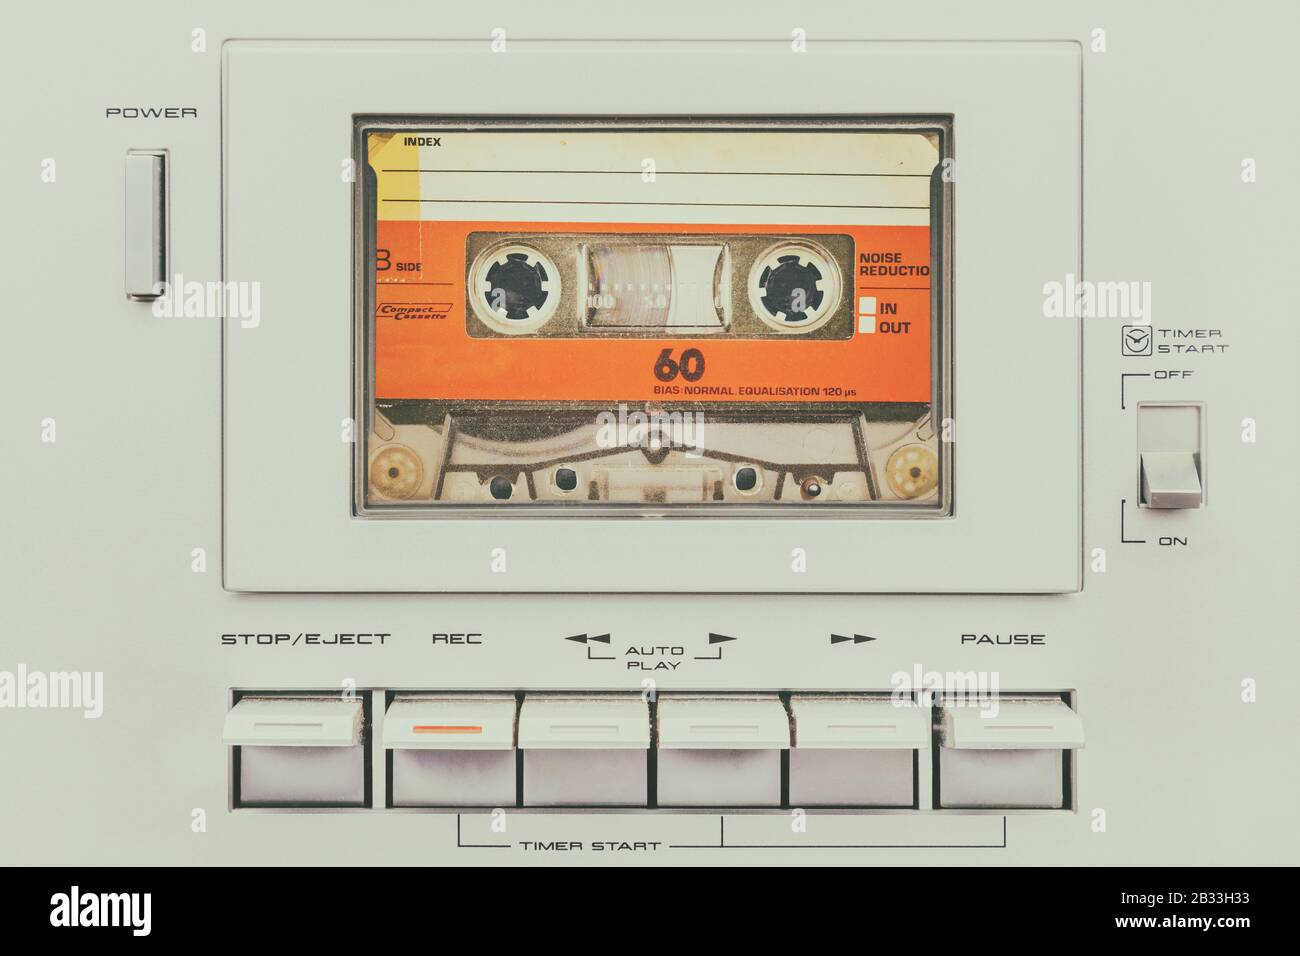 Retro styled image of a vintage silver audio cassette player with buttons Stock Photo